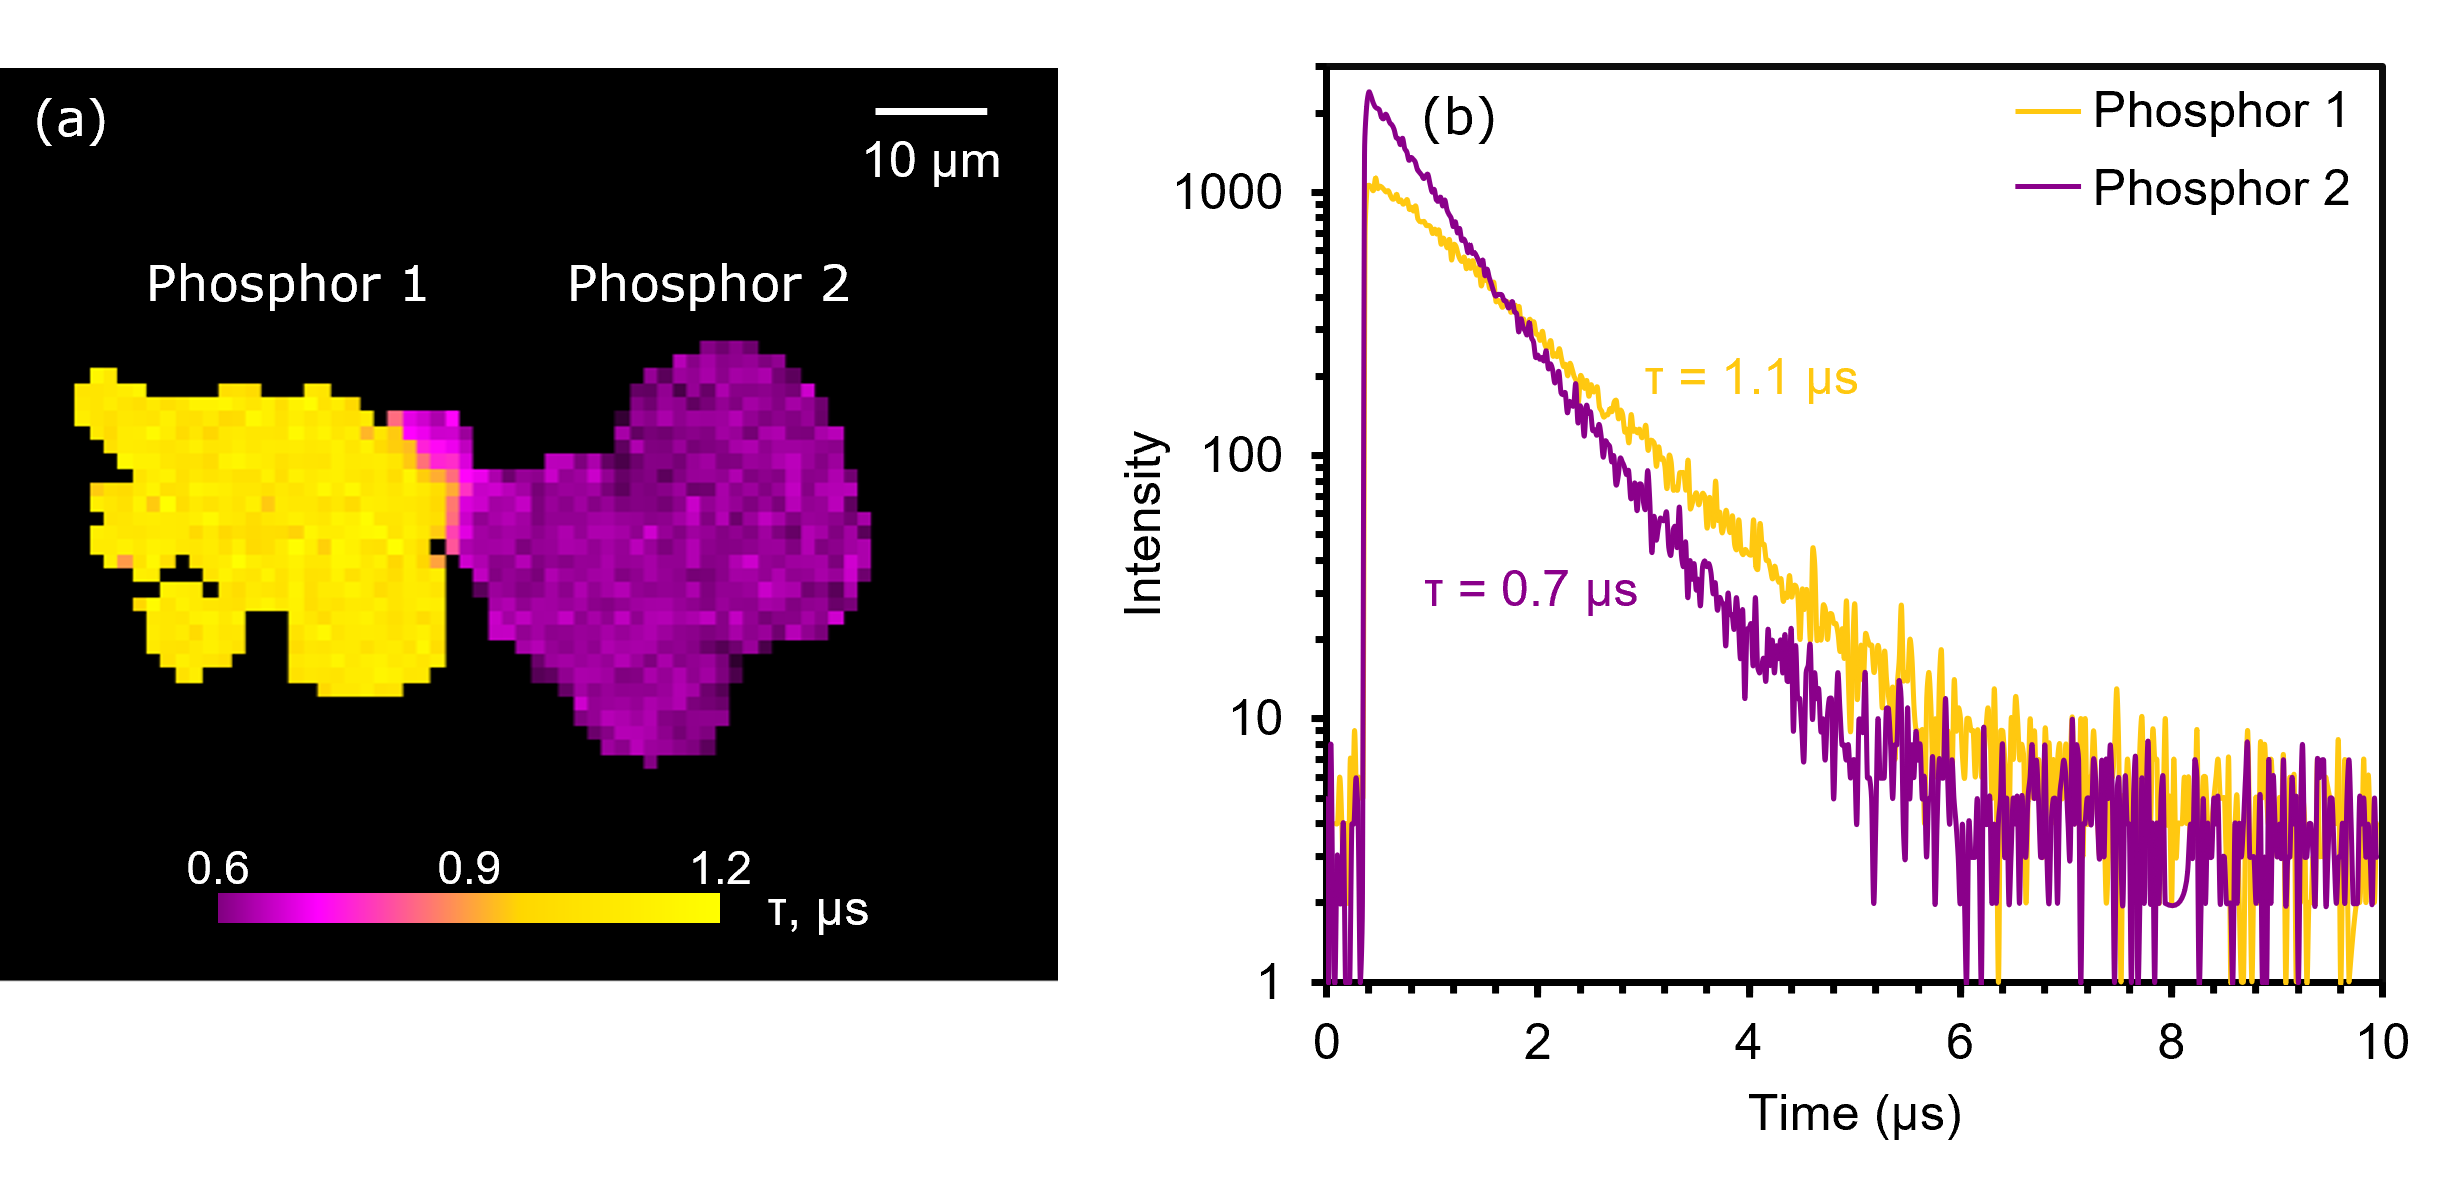 PLIM image and (b) decays of phosphors 1 and 2